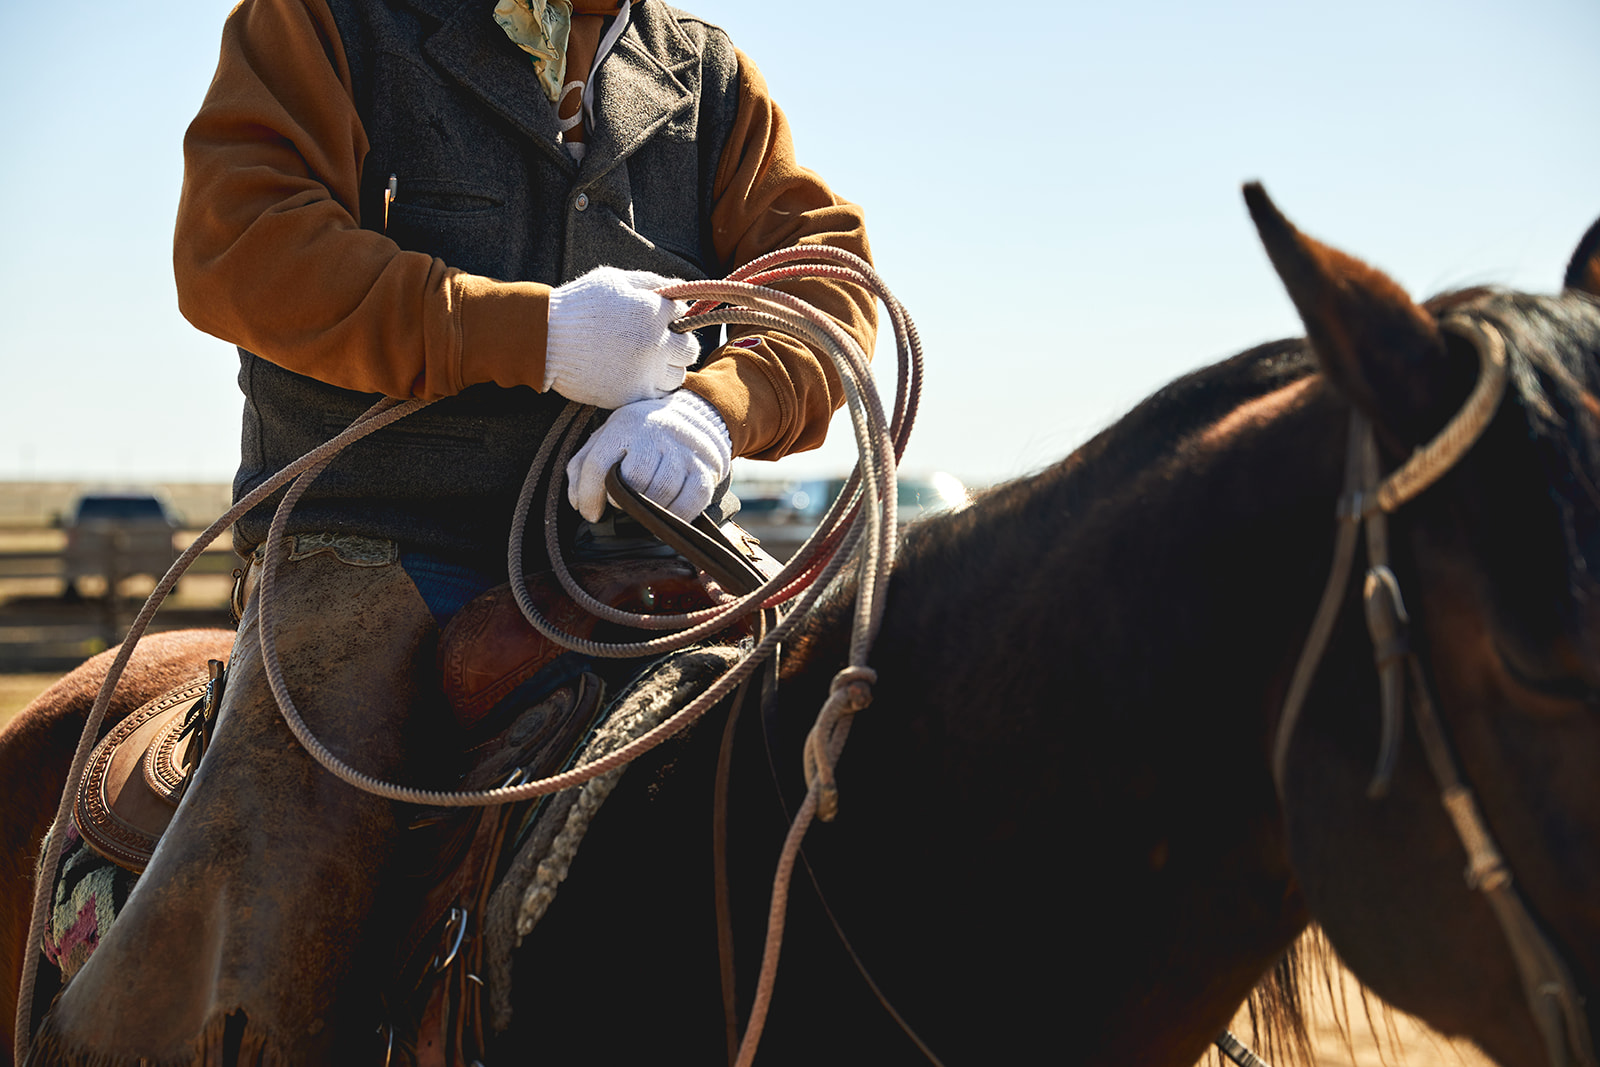 cropped closed lasso held by a man on a horse at a cattle branding in eastern Colorado - John Robson Photography